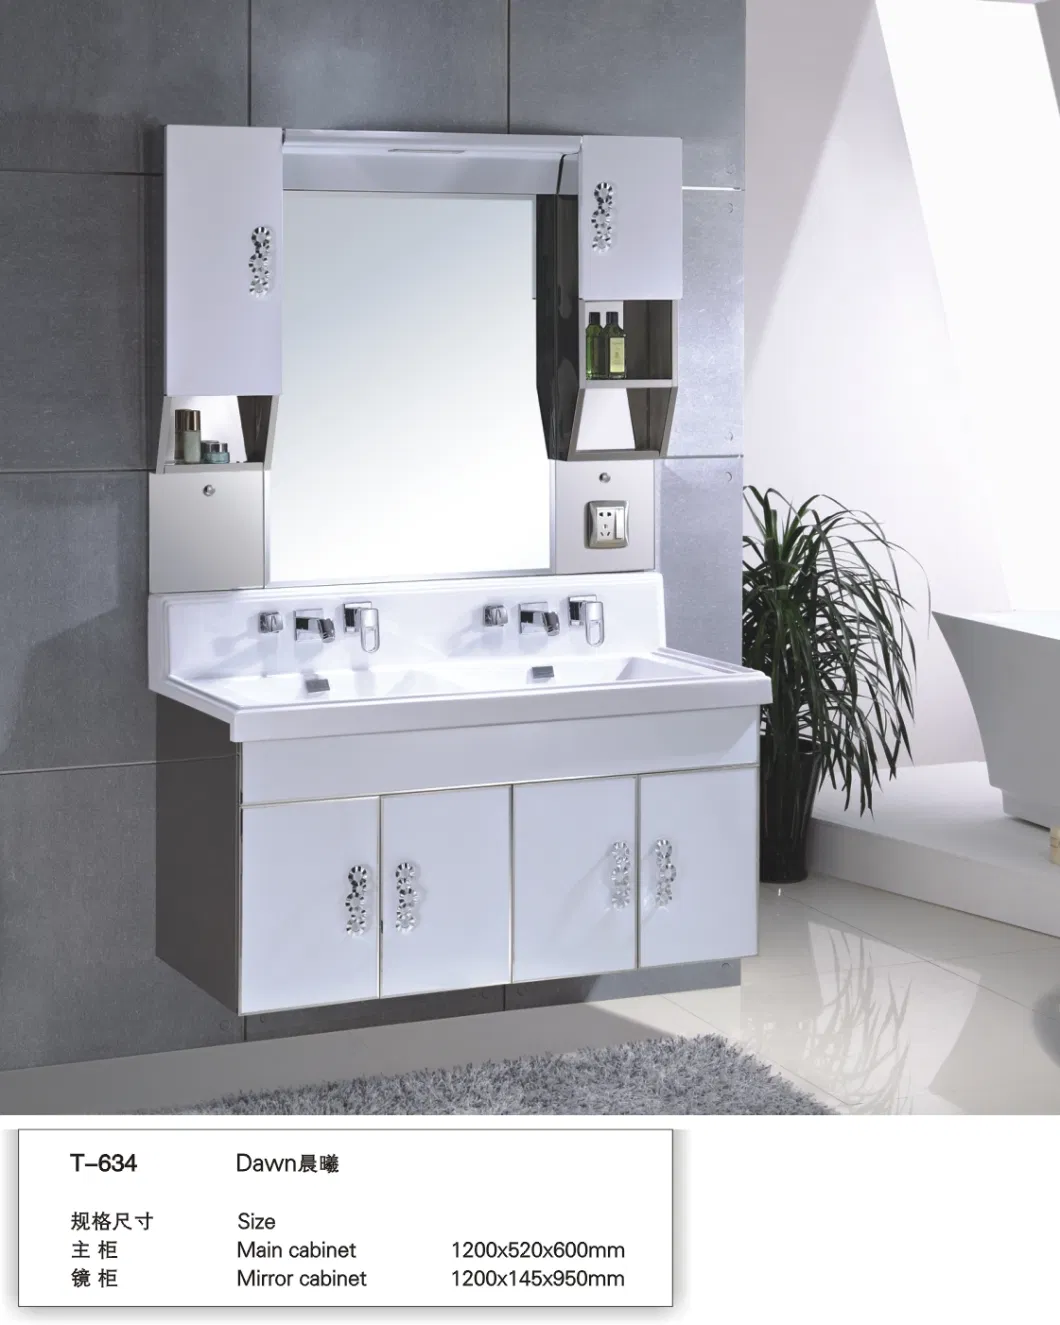 Cheap Small Size Project Mirrored Ceramic Basin Bathroom Vanities